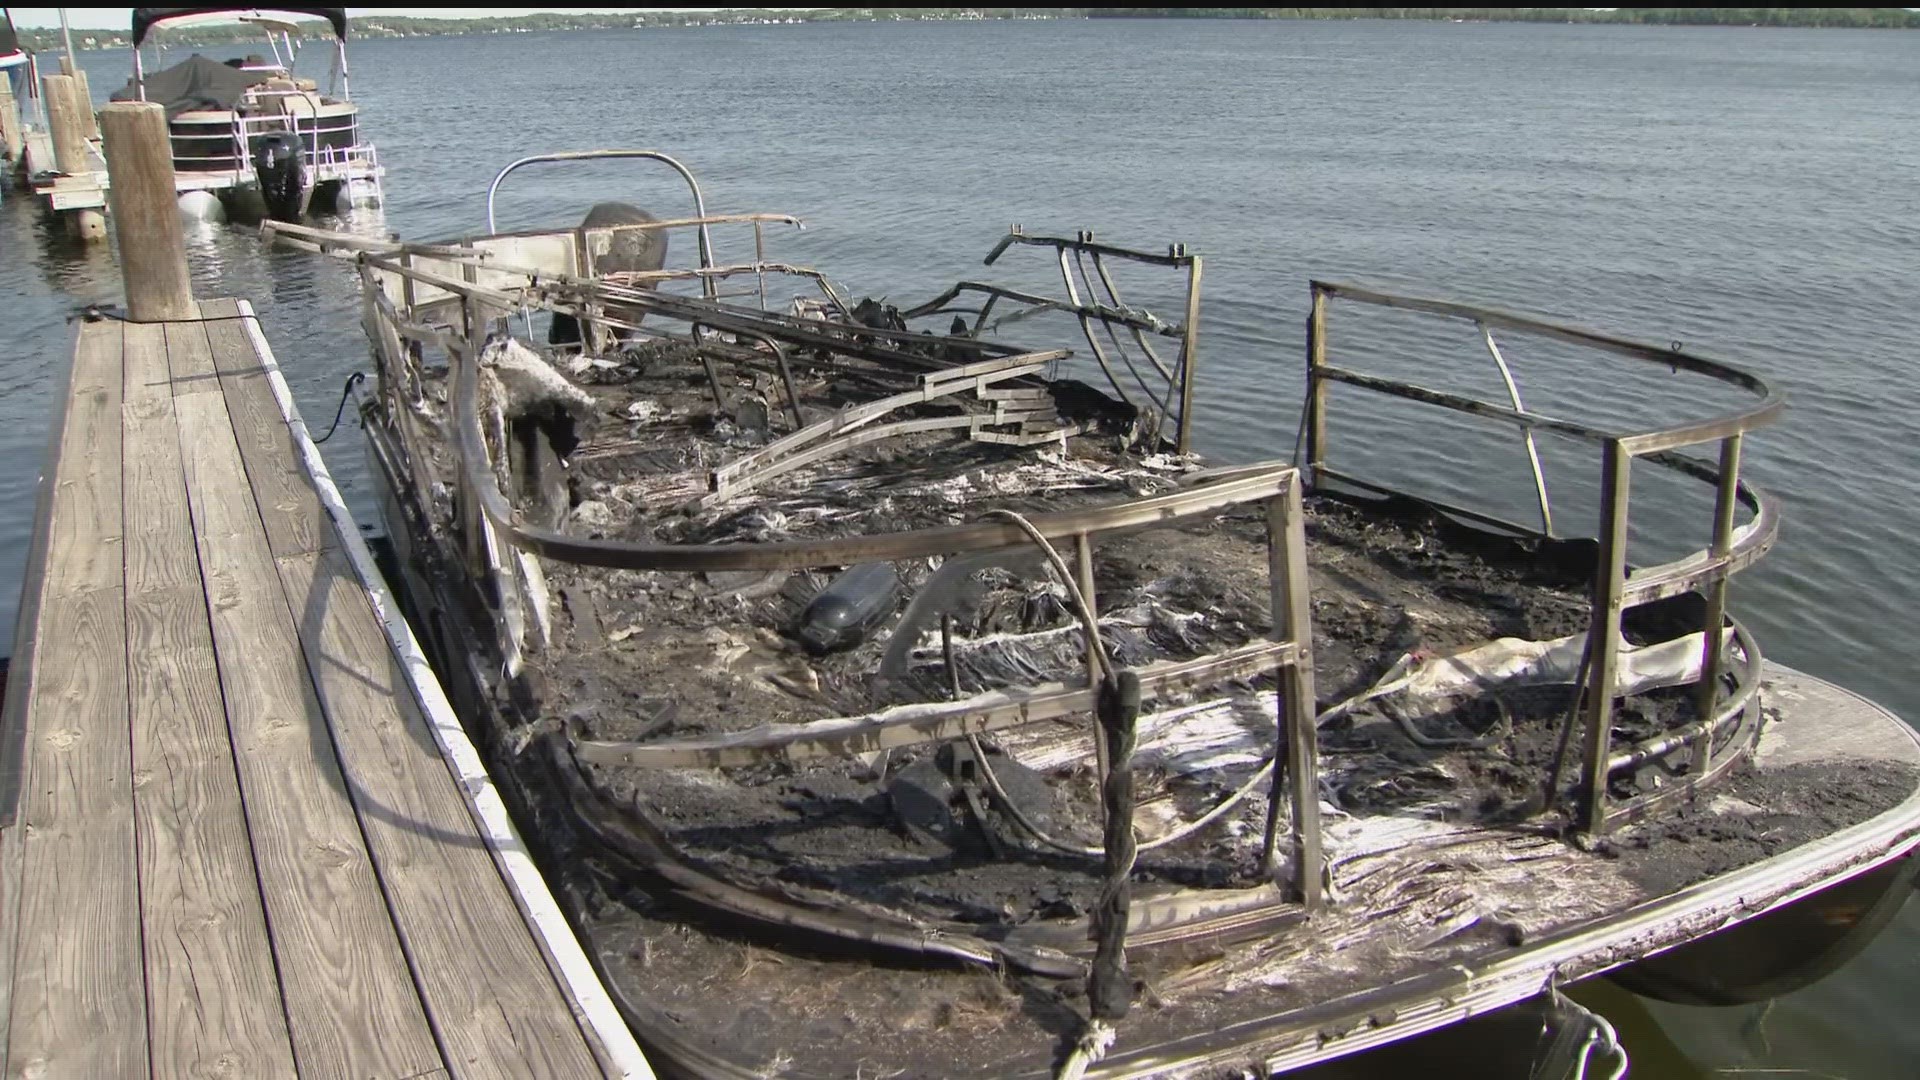 The Hennepin County Sheriff's Office said several people were seen on surveillance video lighting fireworks on the dock just before the fire started.